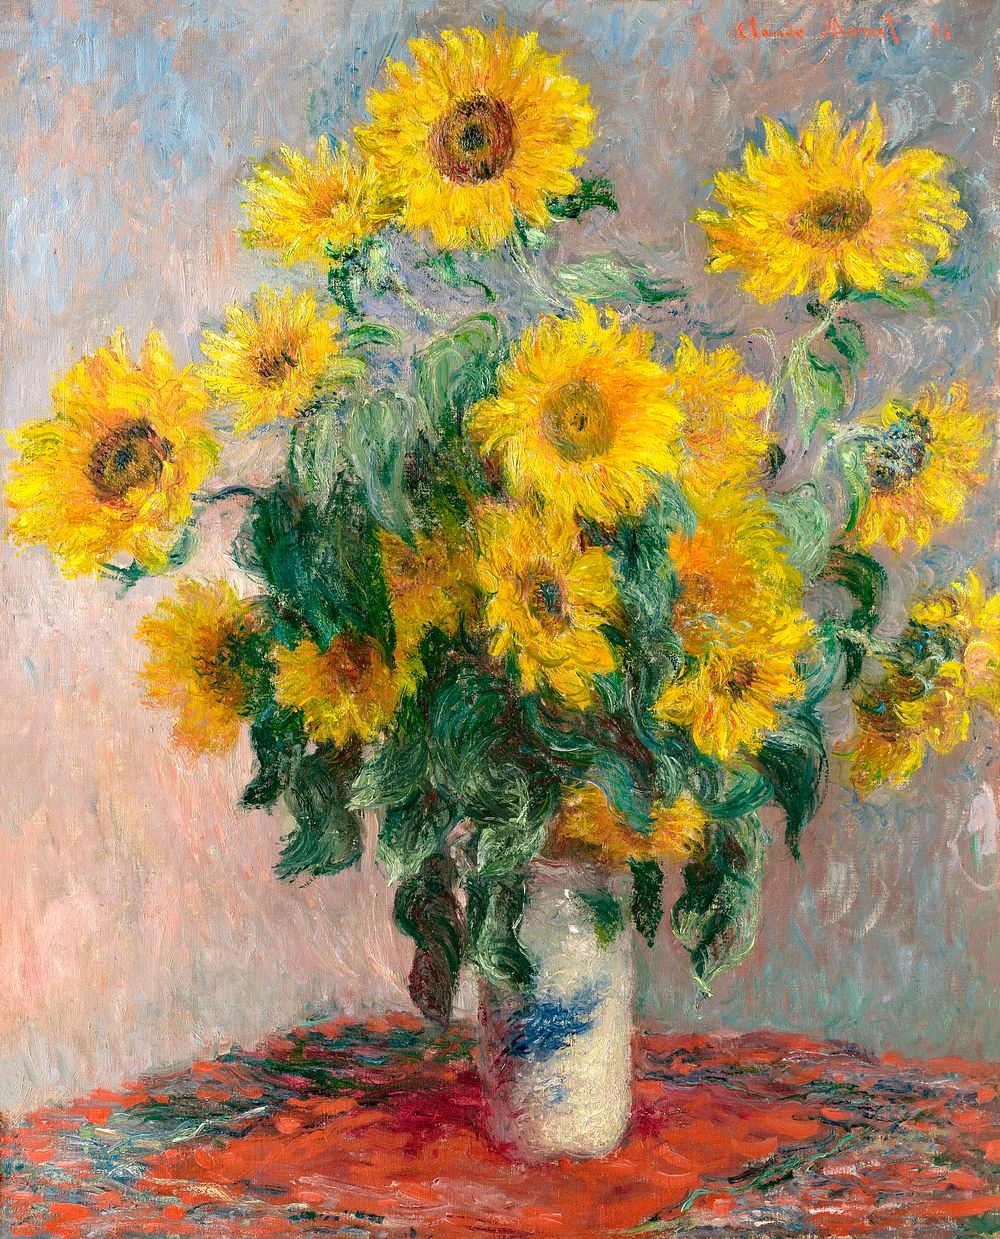 Bouquet of Sunflowers (1881) by Claude Monet, high resolution famous painting. Original from The MET. Digitally enhanced by…